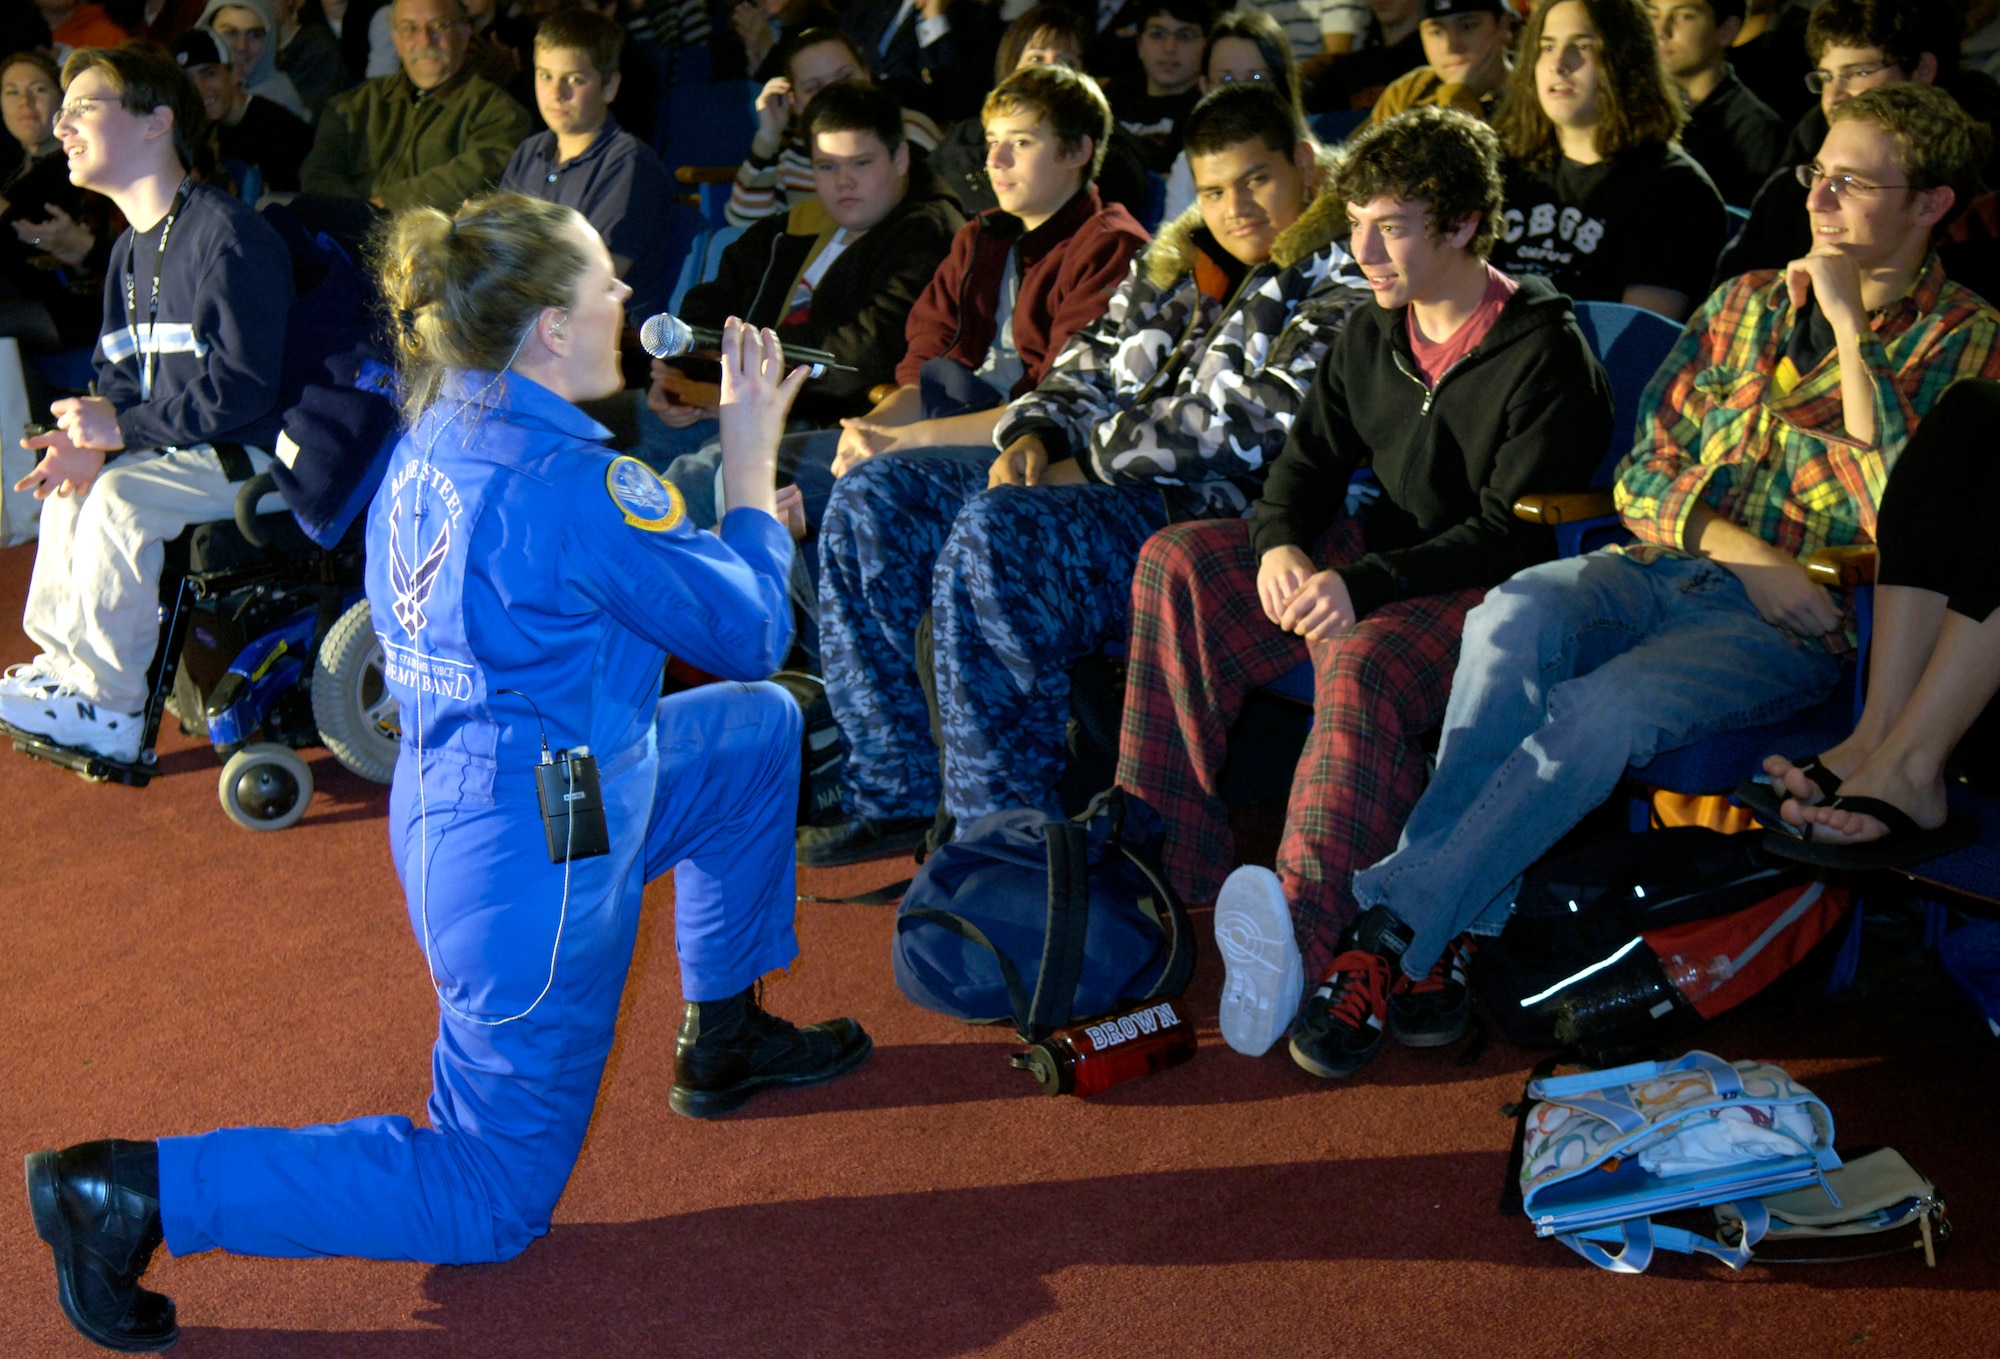 Tech. Sgt. Julie Bradley serenades students at Mamaroneck High School in New York, Nov. 22.  Sergeant Bradley is a member of the U.S. Air Force Academy Band, Blue Steel. The band's performance was just one of several concerts they will peform in New York throughout the holiday weekend. (U.S. Air Force photo/Senior Airman Brian Ferguson)
